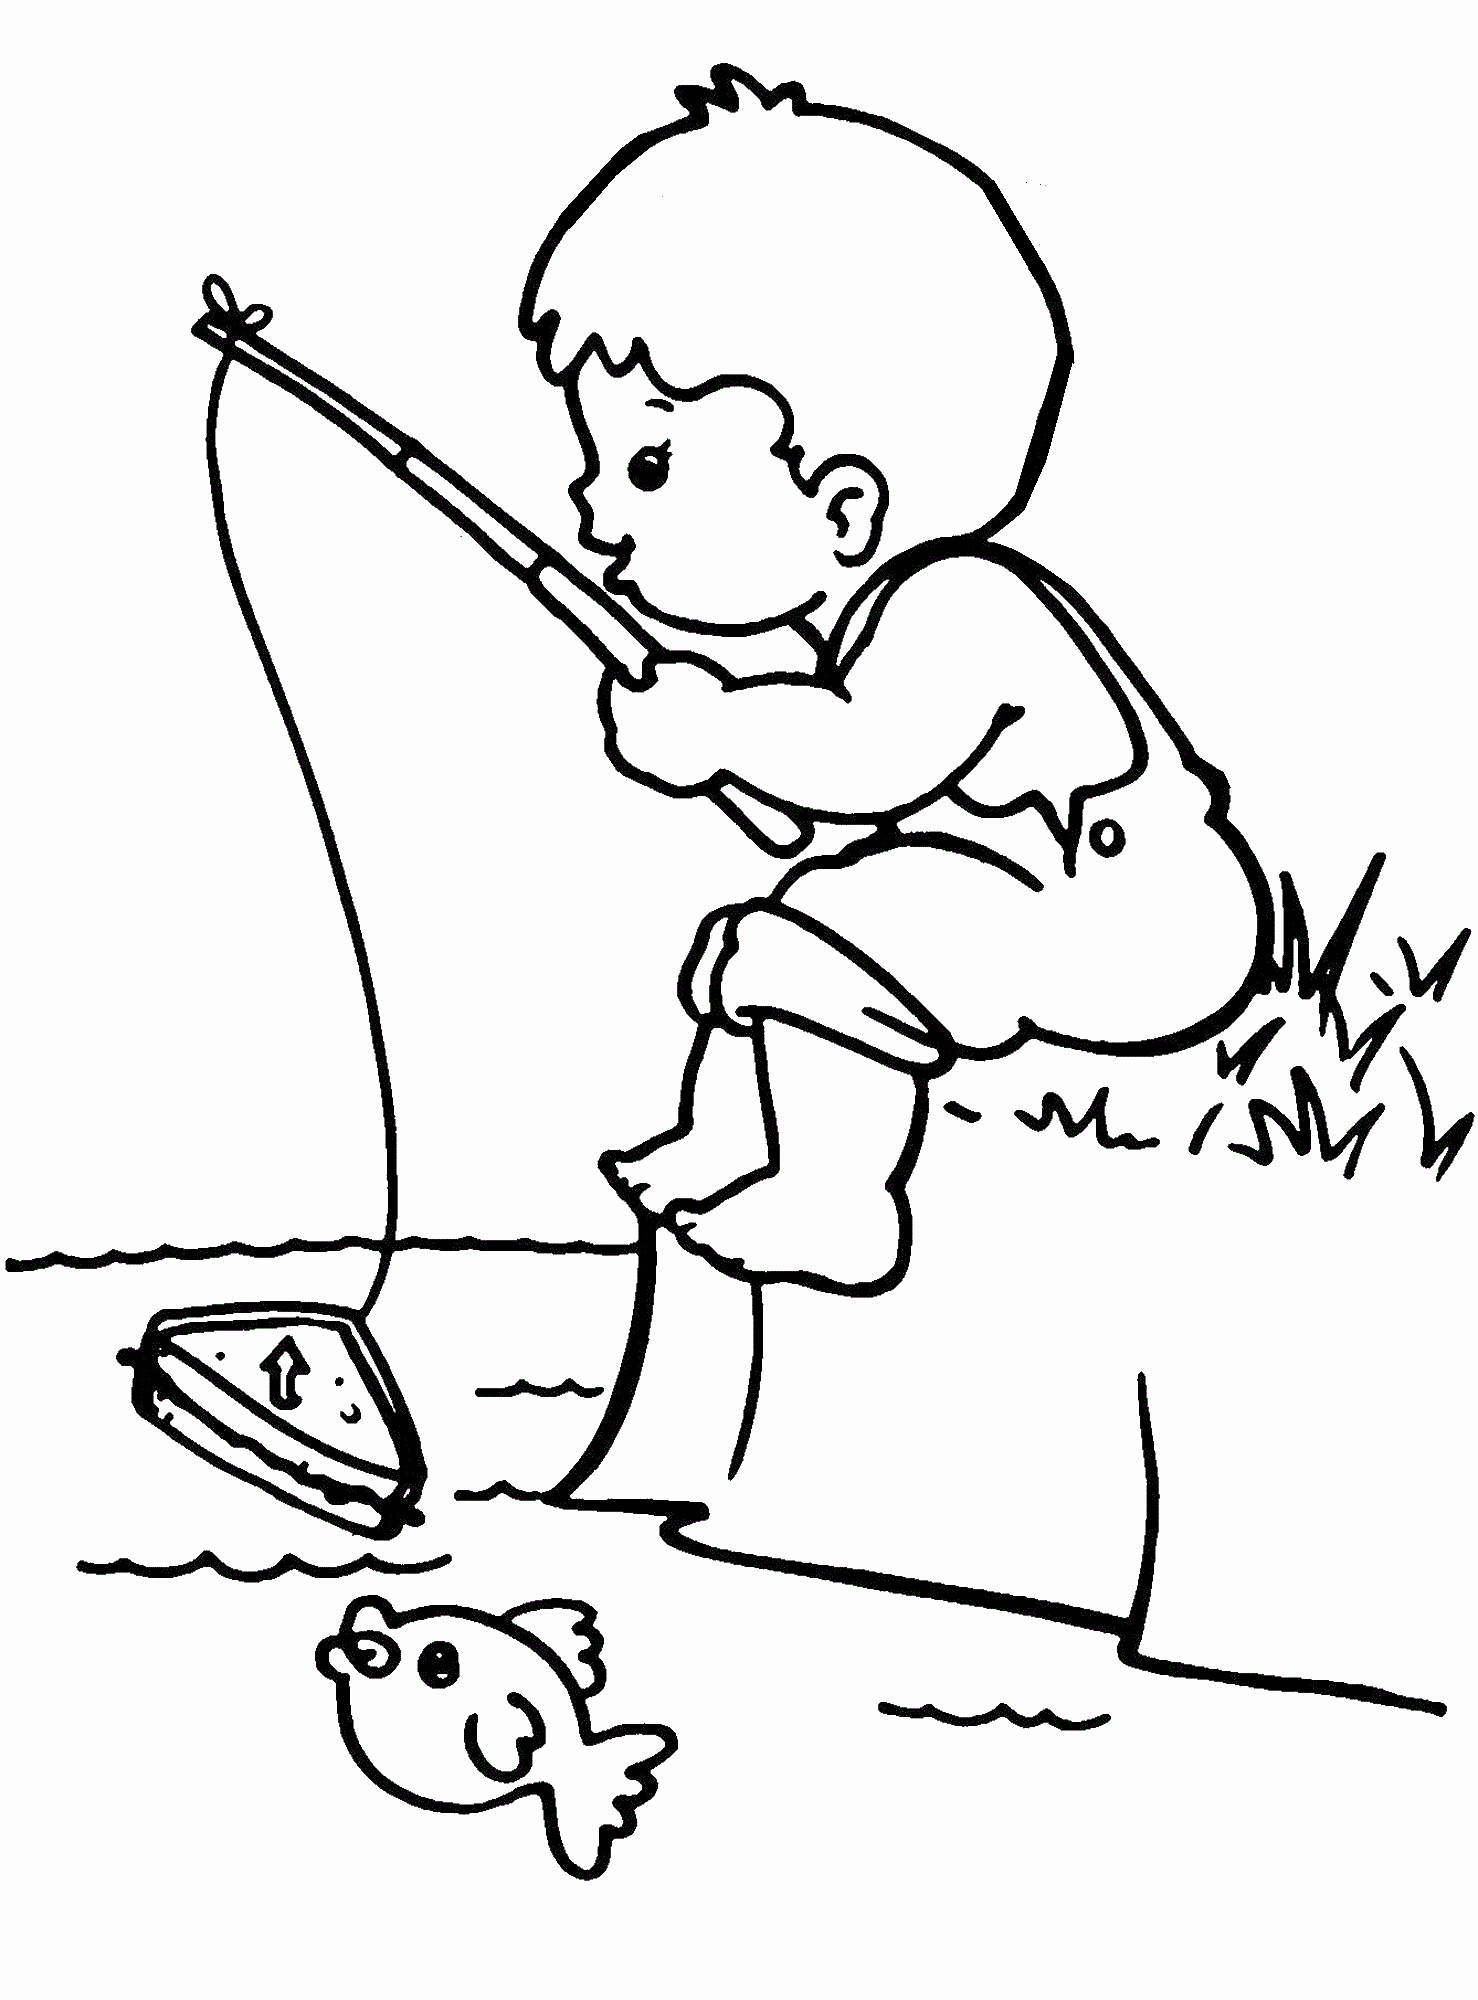 Fish Pictures to Print Elegant Fishing Coloring Pages Best Coloring Pages for Kids